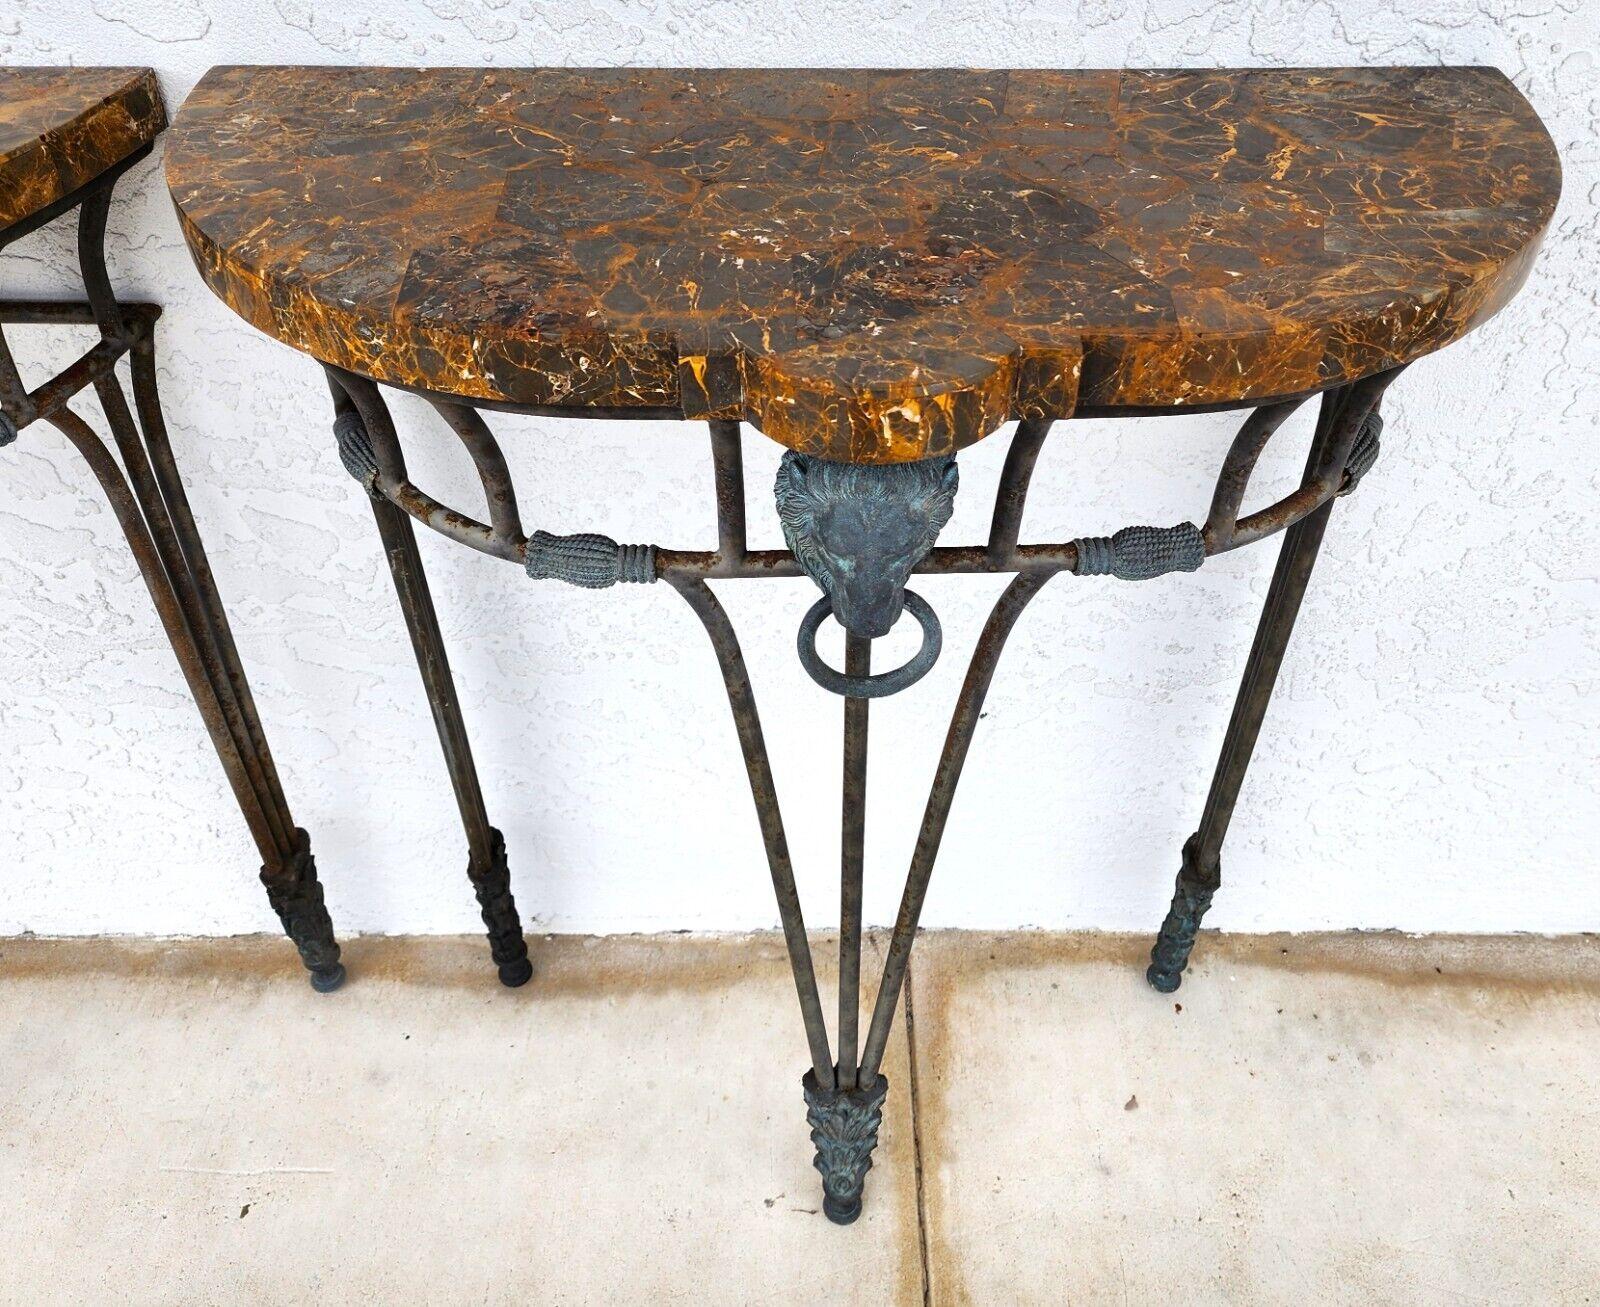 For FULL item description click on CONTINUE READING at the bottom of this page.

Offering One Of Our Recent Palm Beach Estate Fine Furniture Acquisitions Of A 
Vintage Pair of French Console Tables by MAITLAND SMITH
Featuring Iron supports adorned